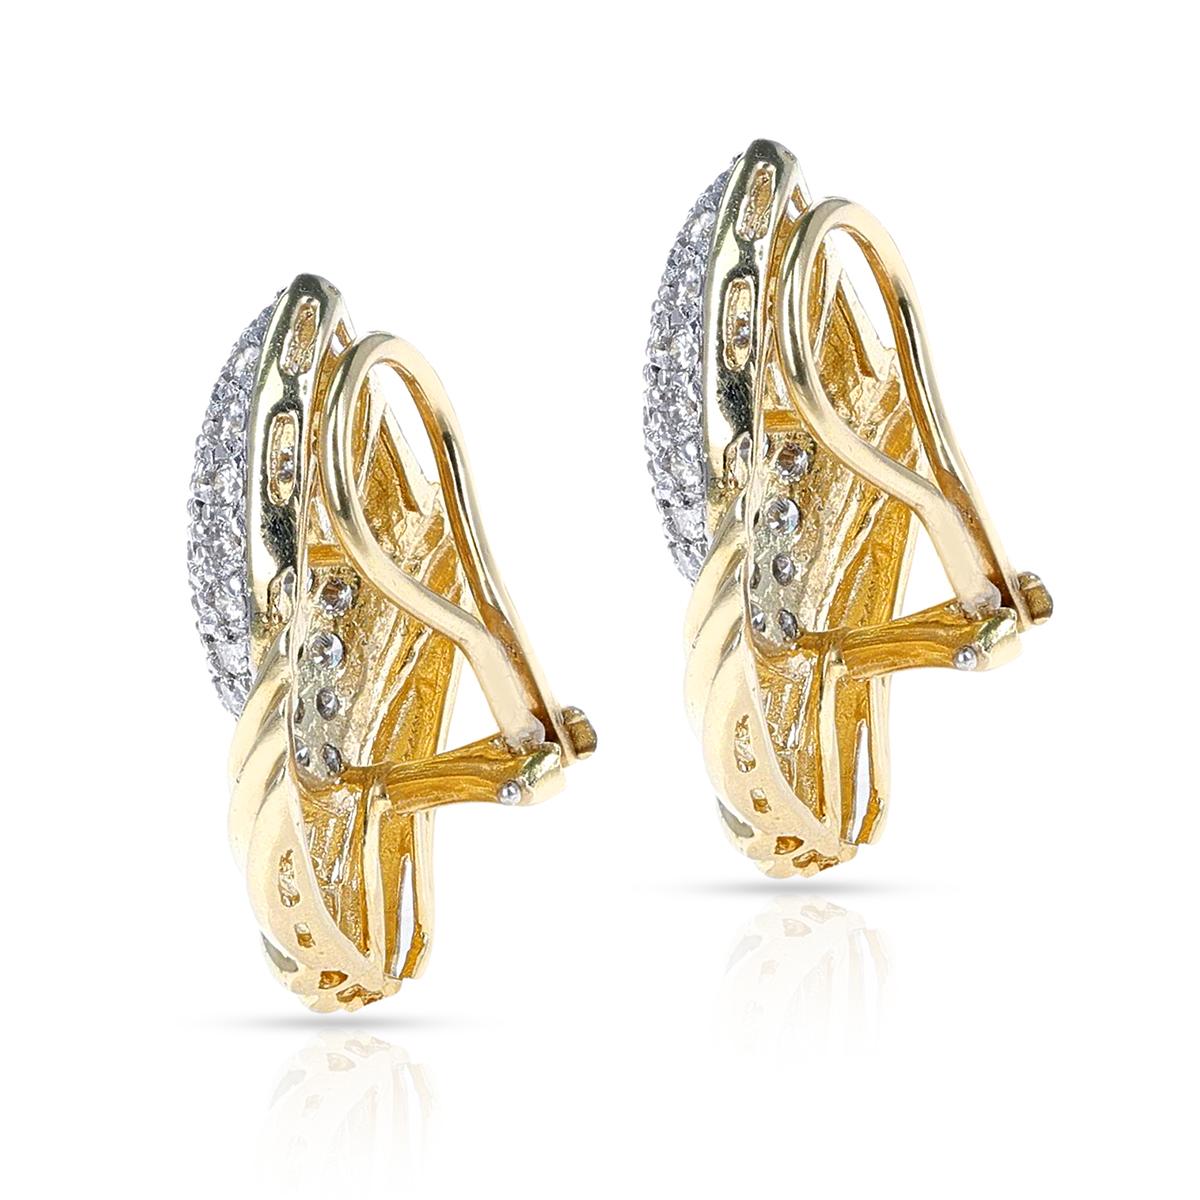 A beautiful pair of leaf-style diamond cocktail earrings made in 18 Karat Yellow Gold. The length of the earring is 1.20.